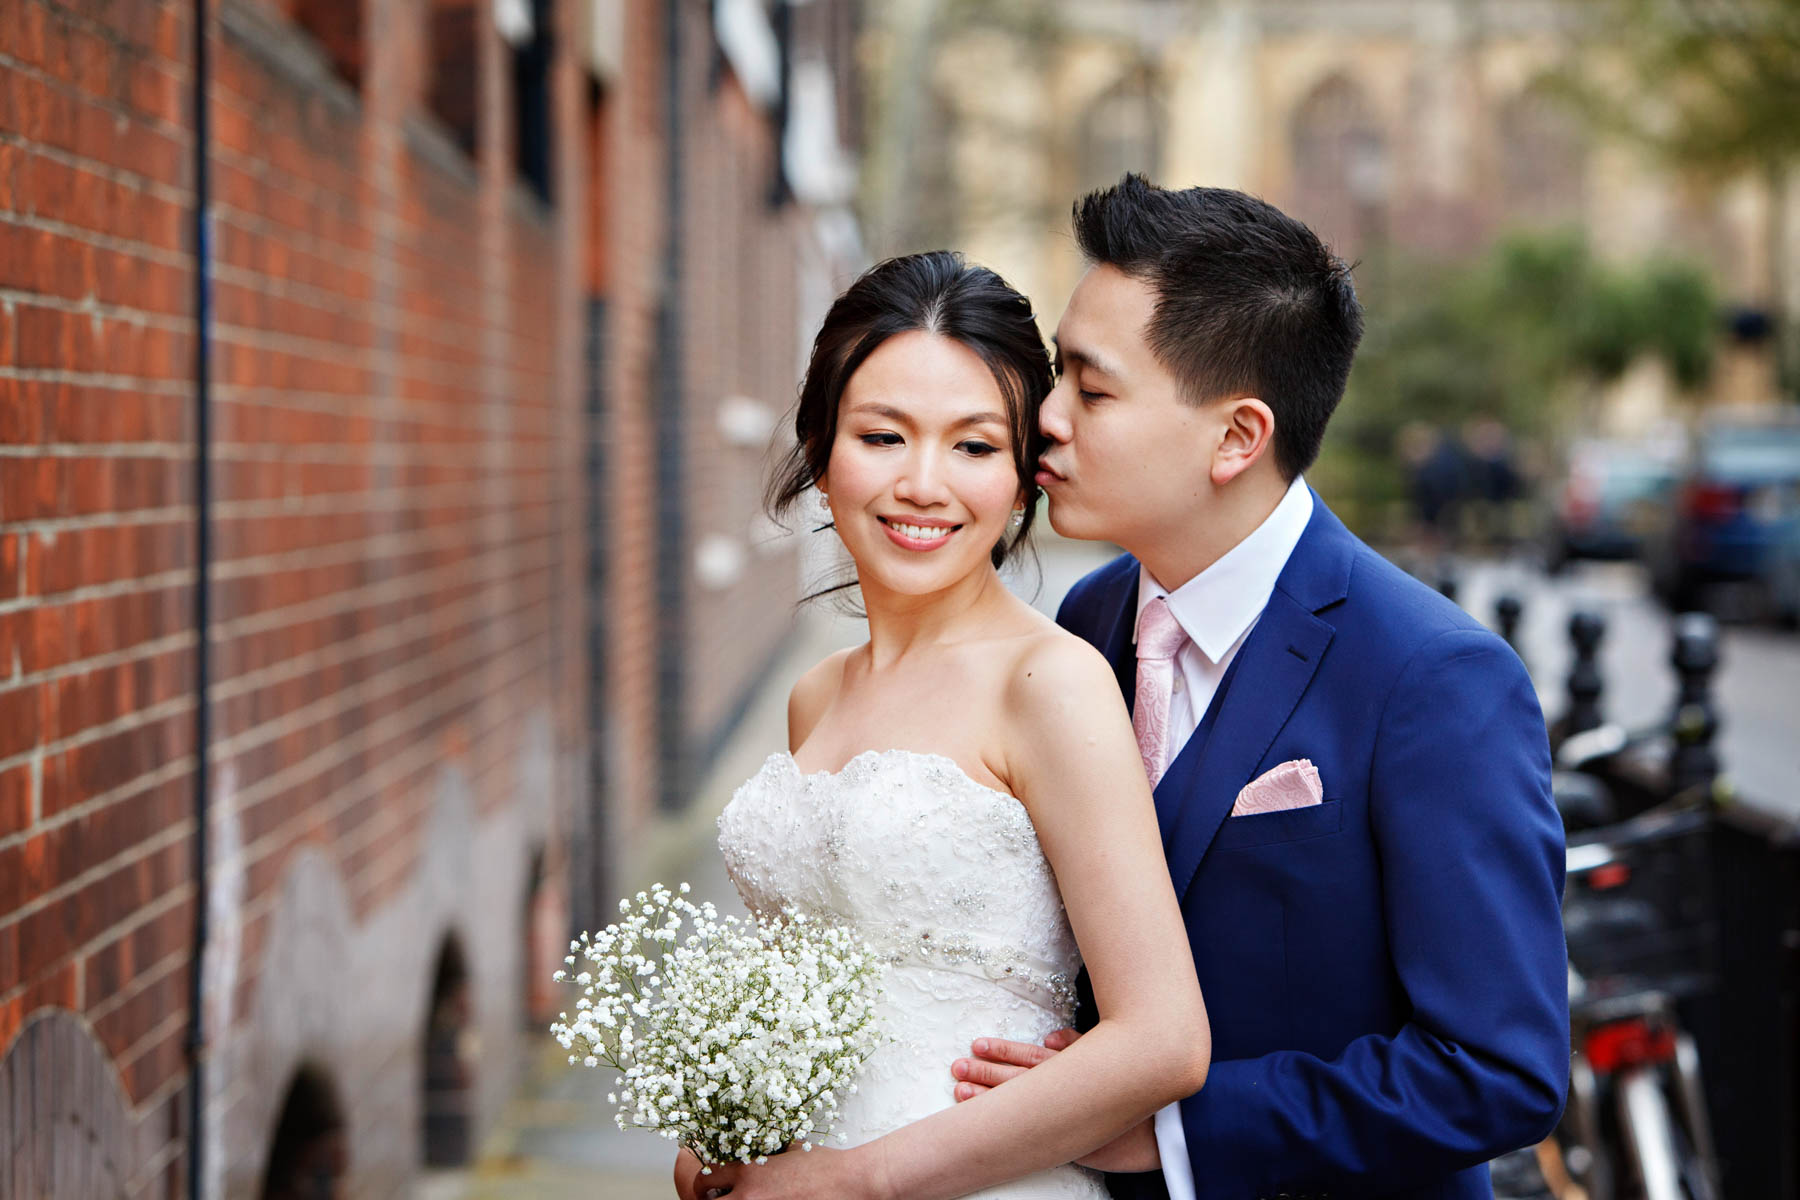 A Chinese bride and groom cuddle together for a romantic wedding portrait in Chelsea after their Chelsea Old Town Hall Wedding. The groom is kissing the bride on the cheek.